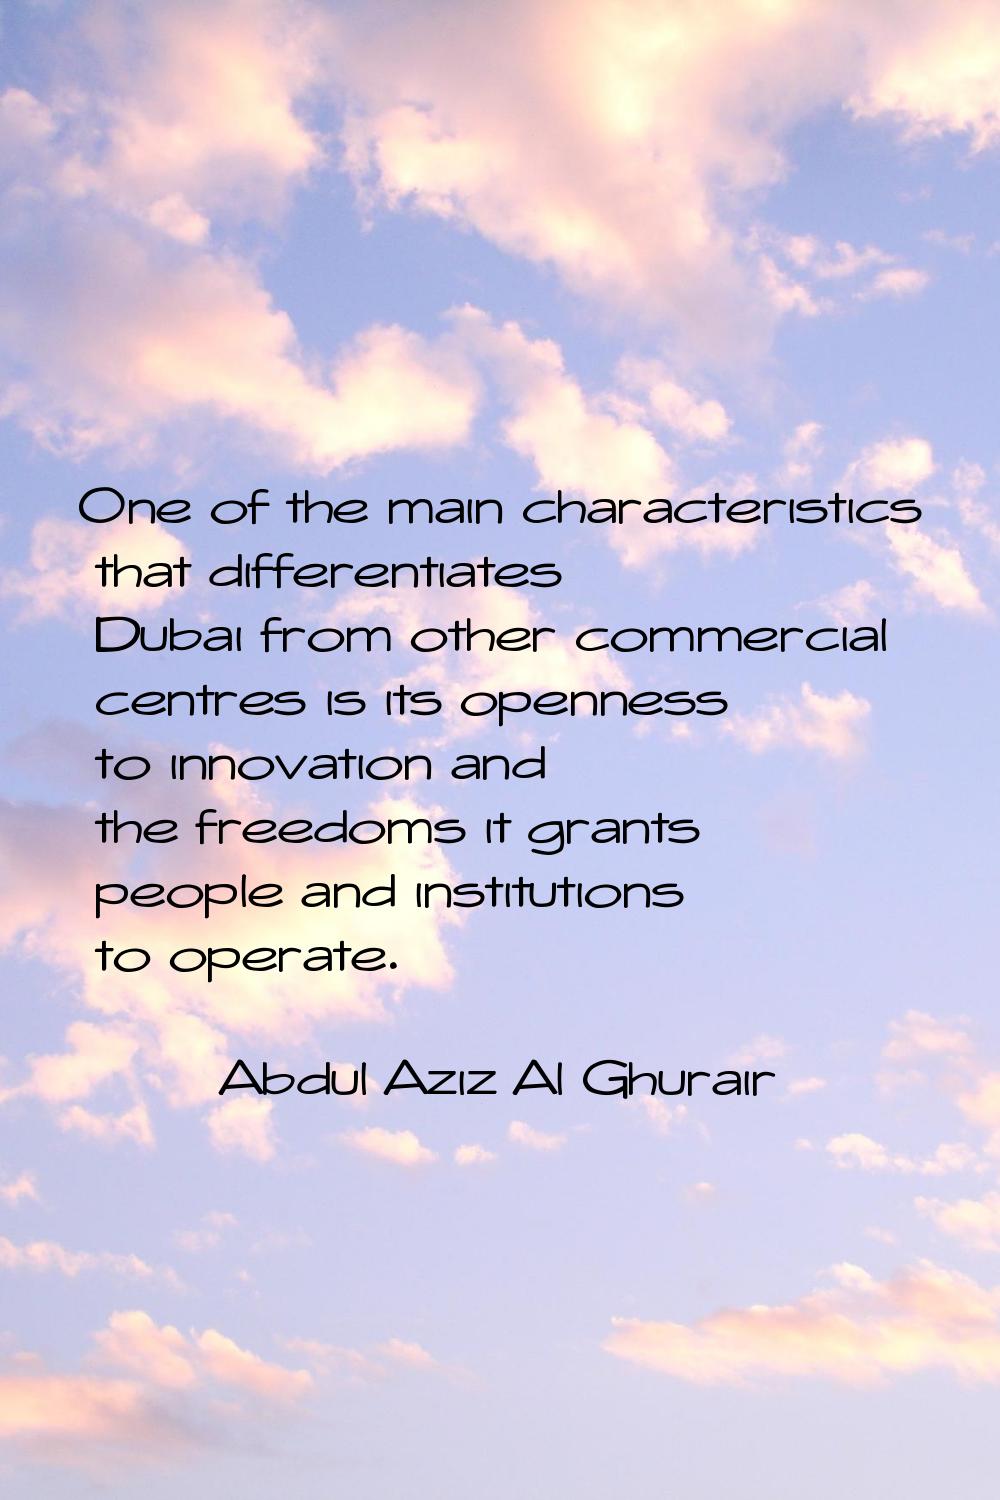 One of the main characteristics that differentiates Dubai from other commercial centres is its open